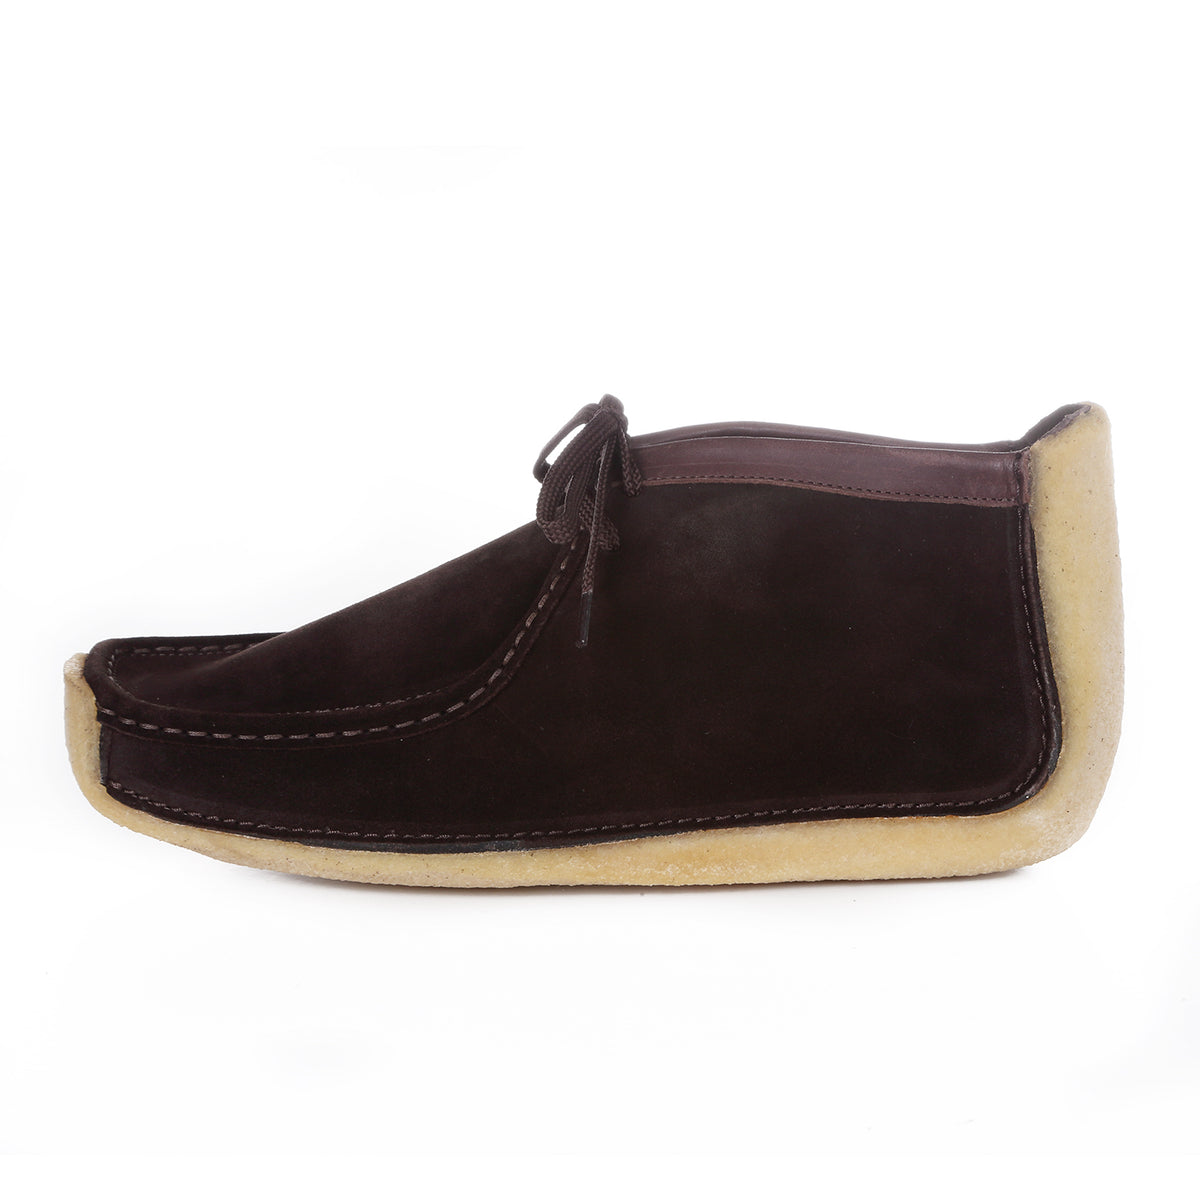 Padmore & Barnes - M490 For YMC - Brown Suede